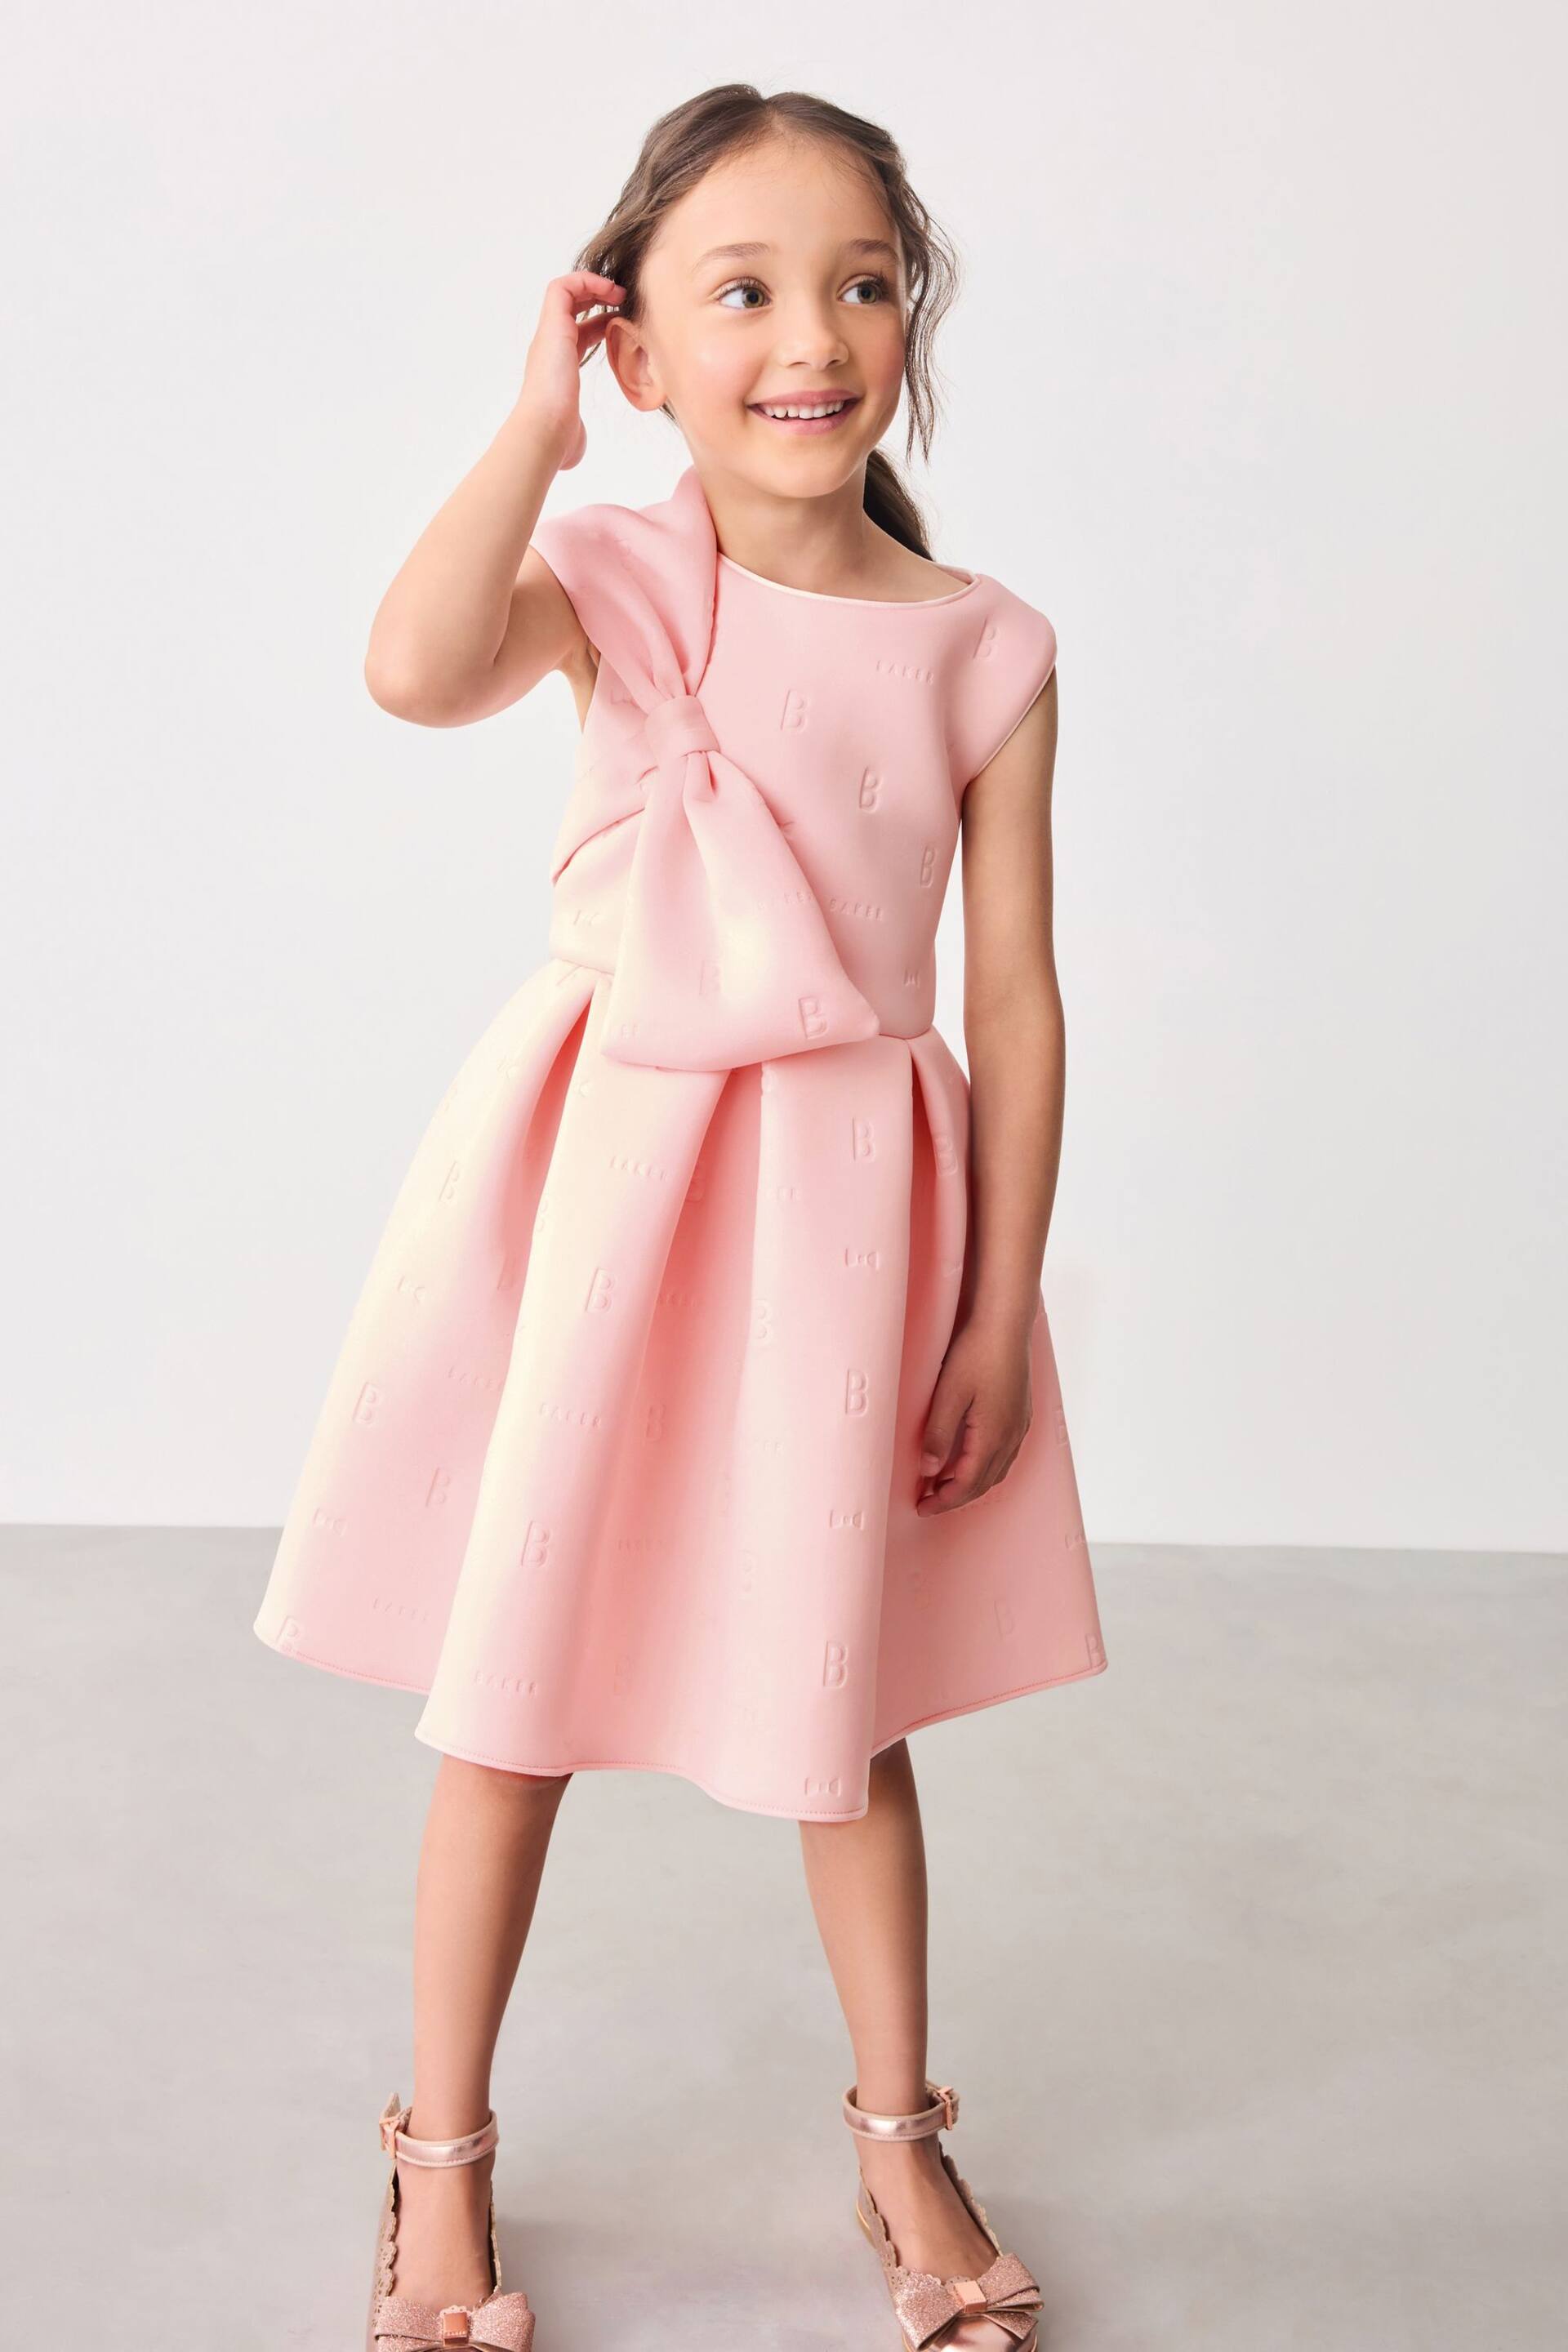 Baker by Ted Baker Bow Embossed Scuba Pink Dress - Image 1 of 5